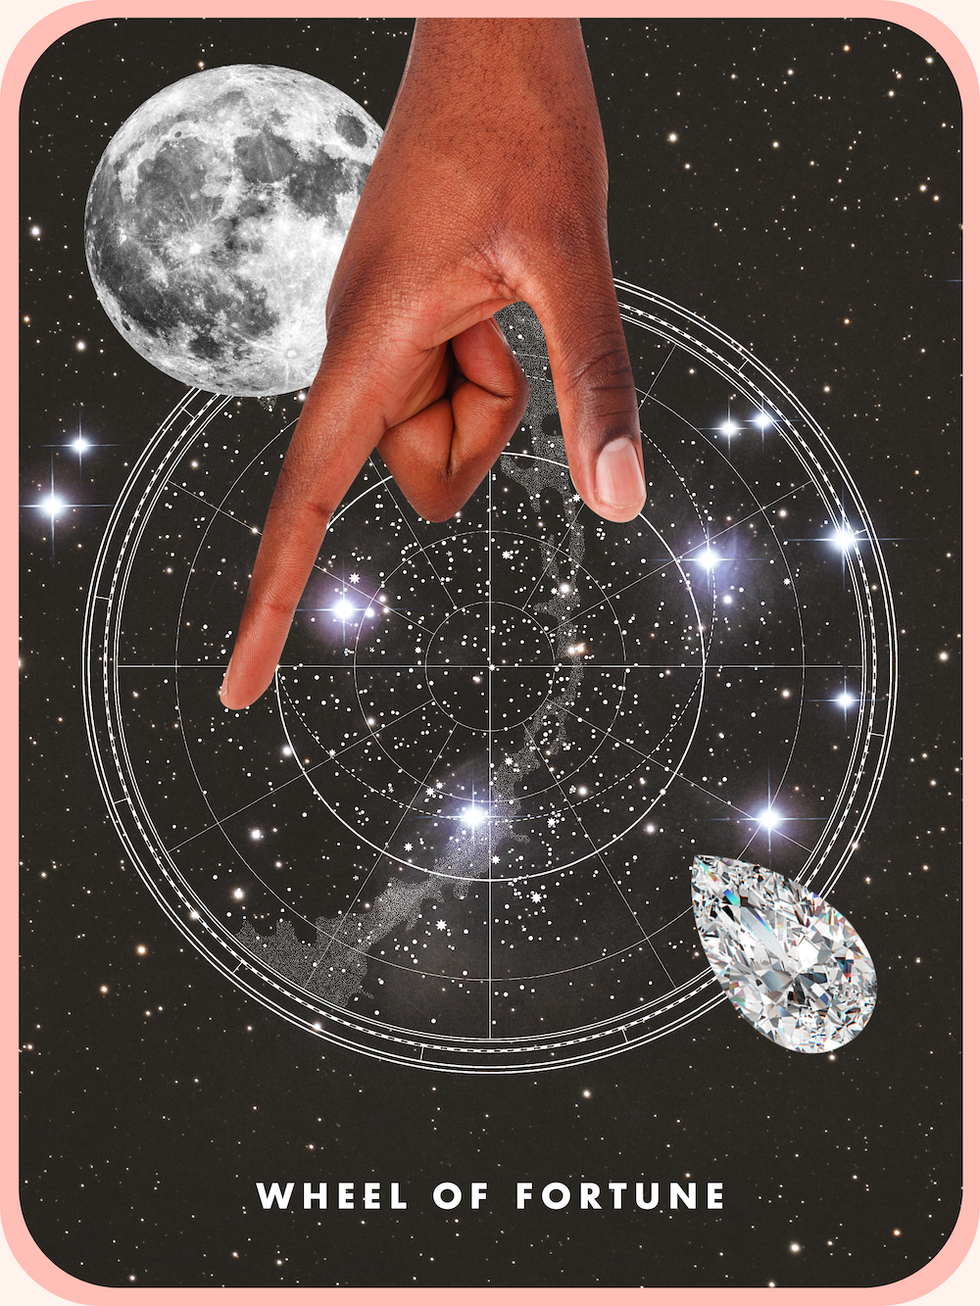 the cosmo tarot card the wheel of fortune, showing a hand reaching out over a map of the sky